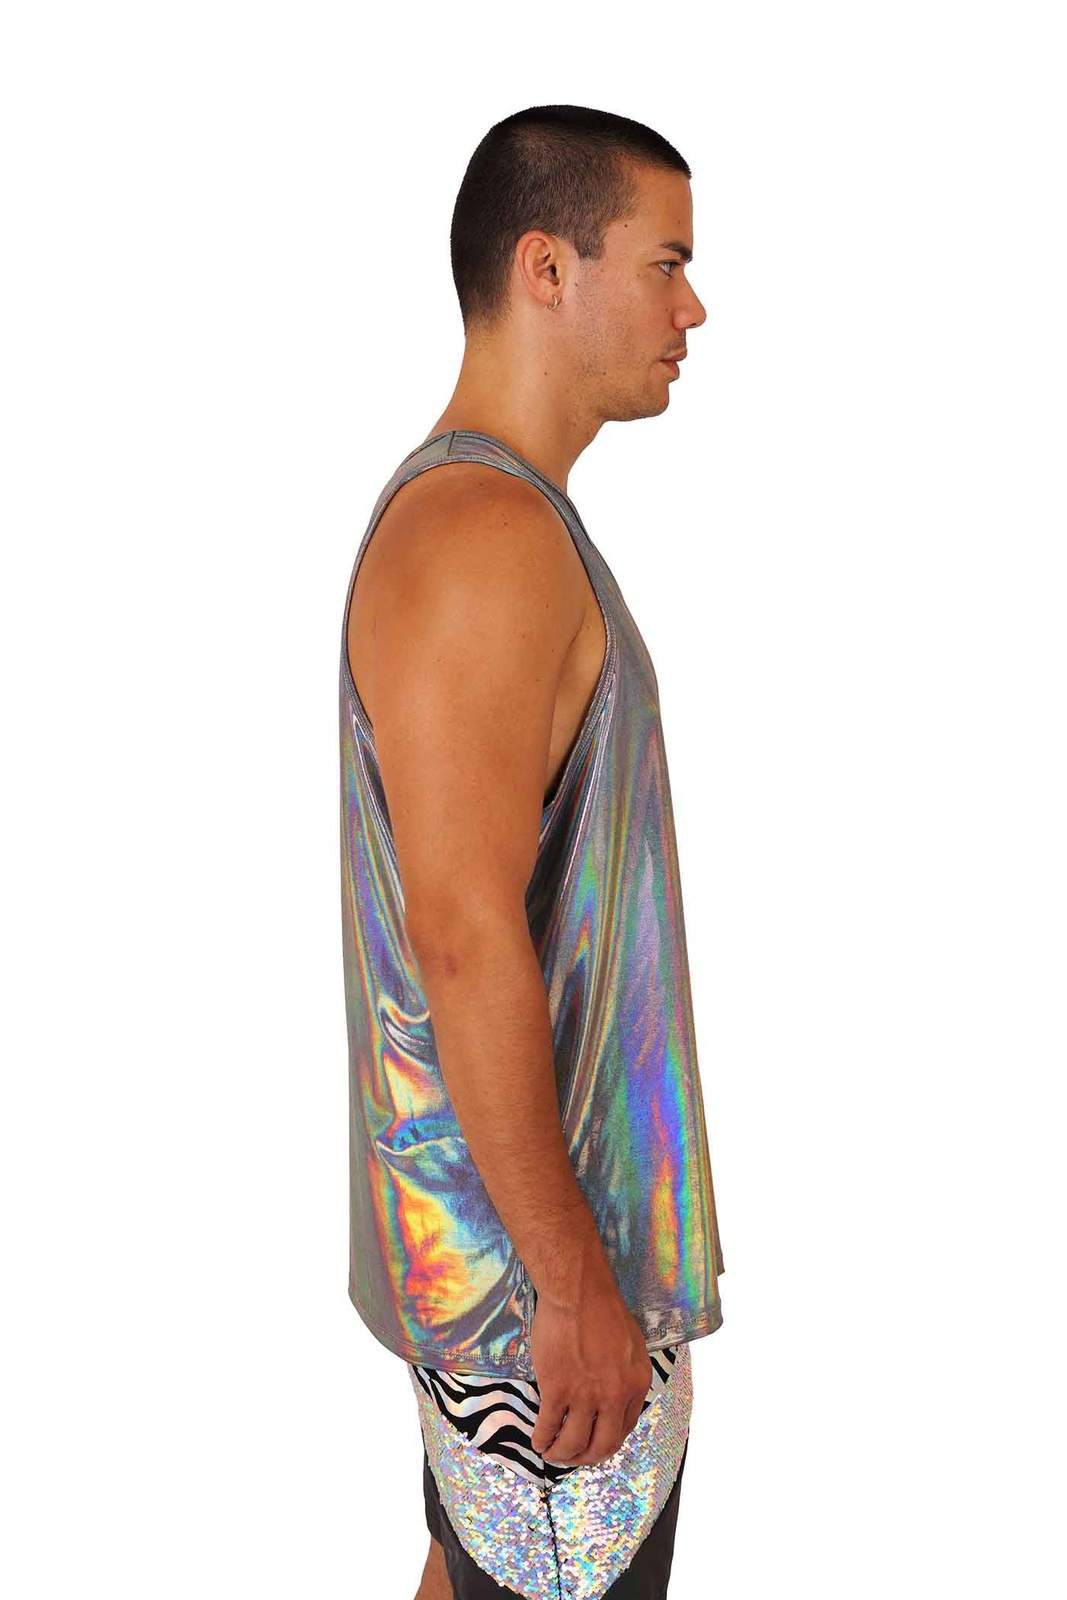 man wearing a holographic silver loose tank top from Love Khaos.